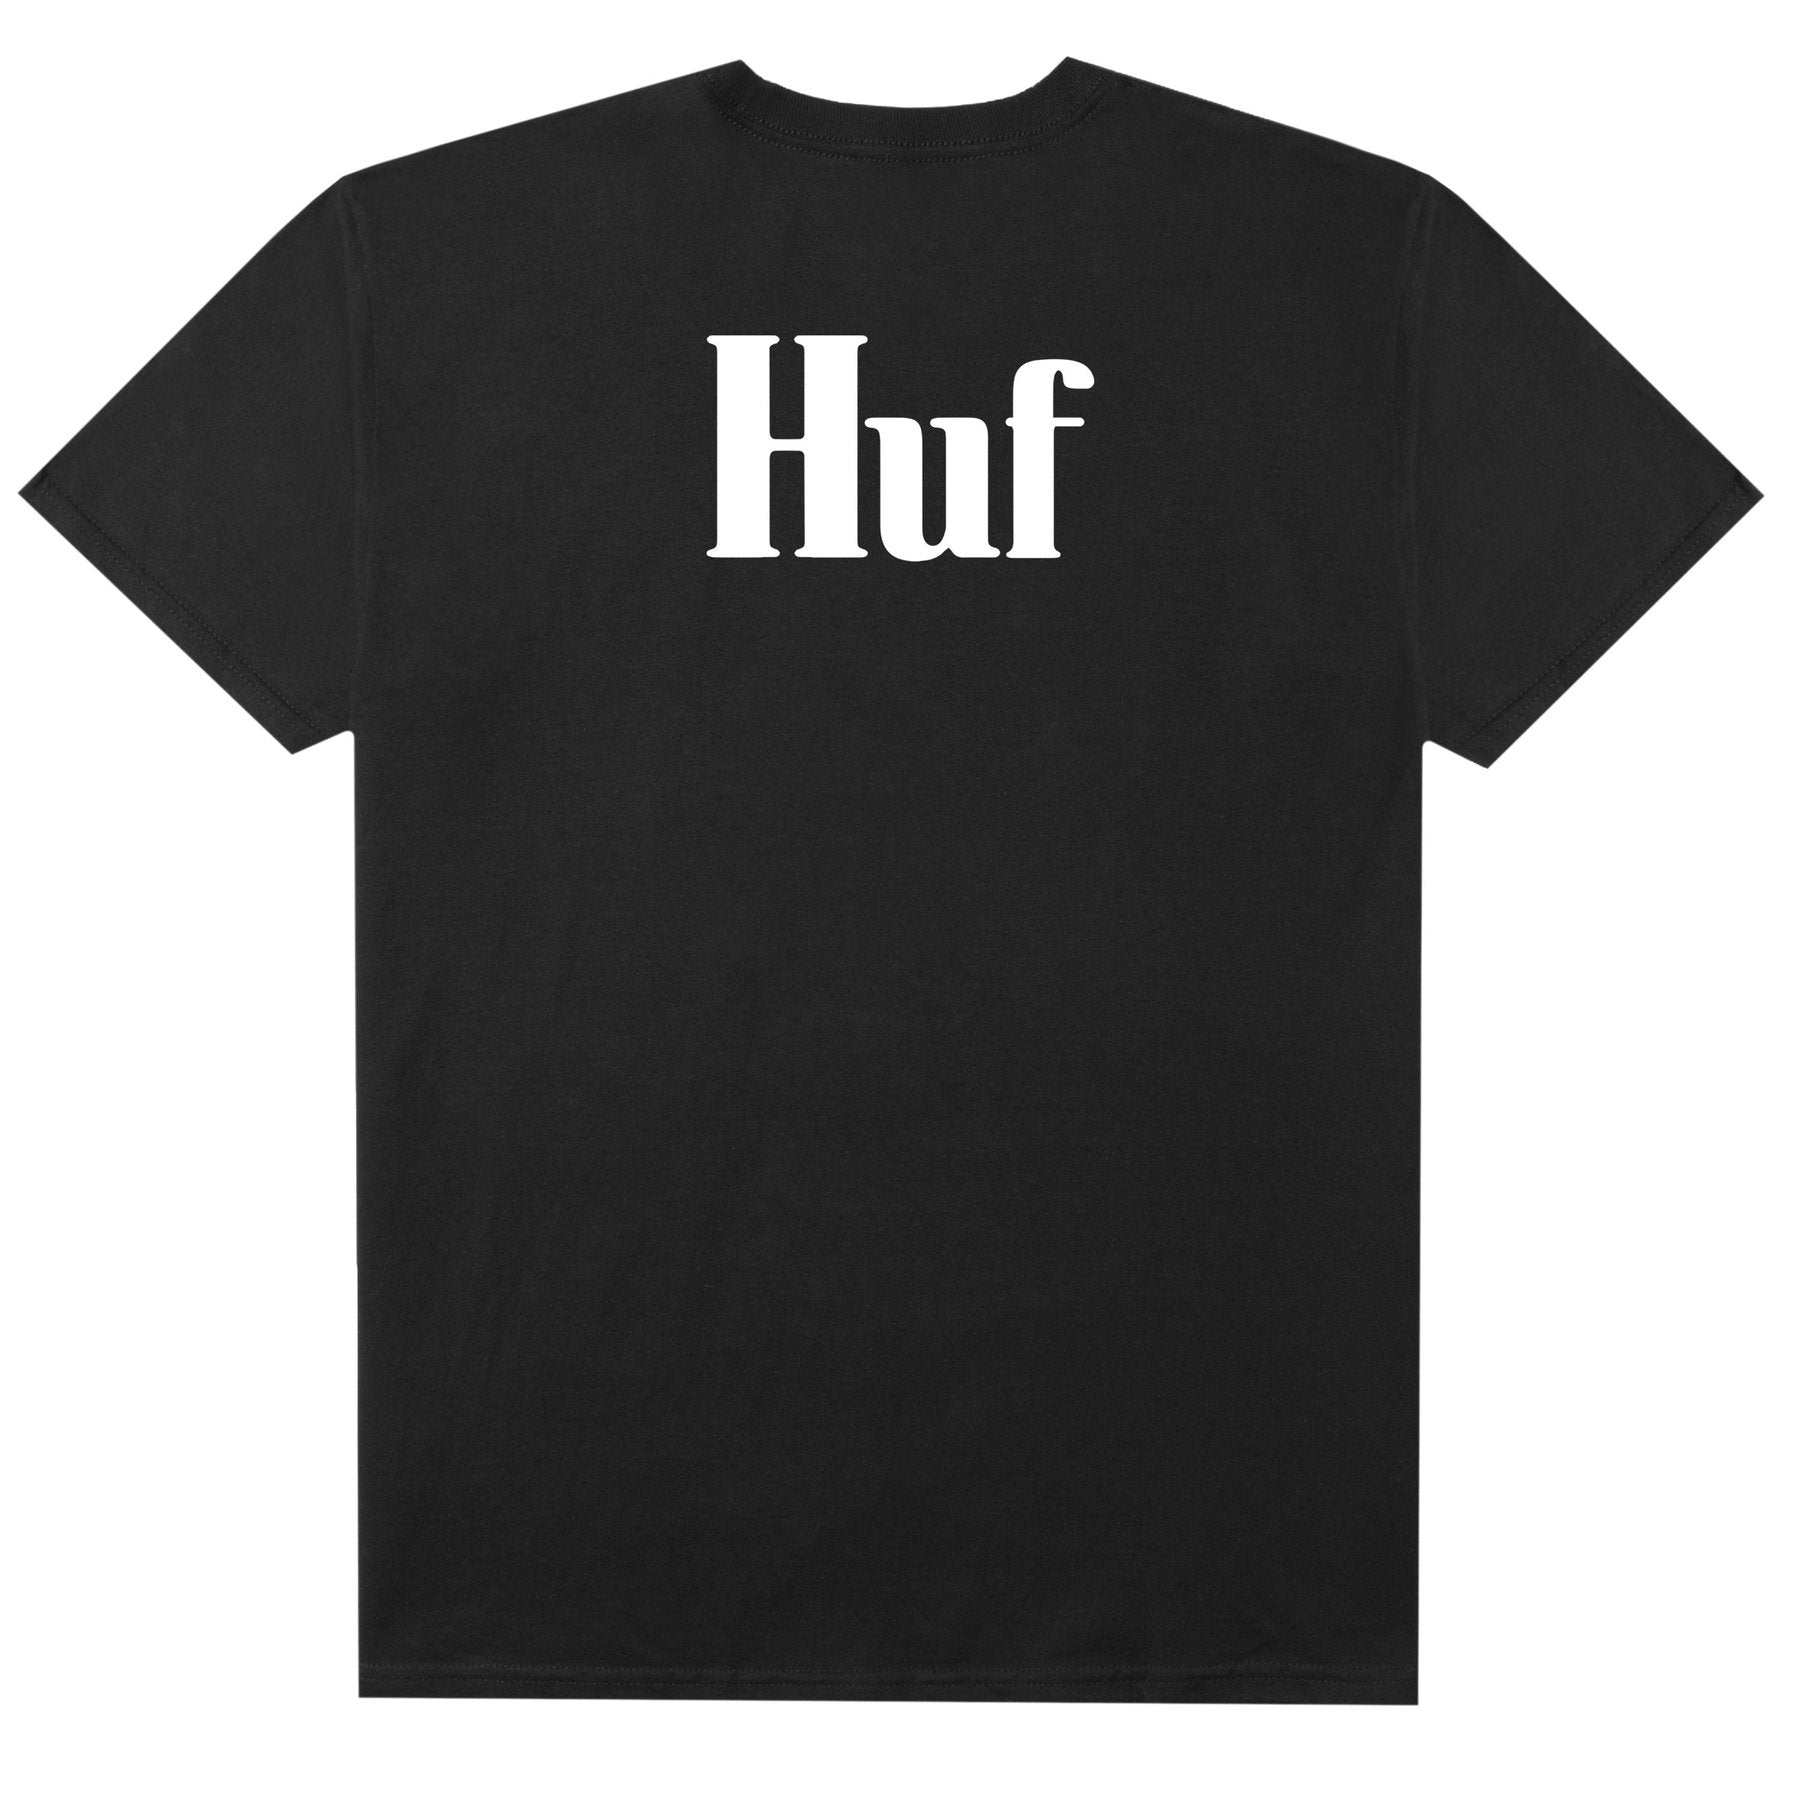 TS00898 HUF PARTYS OVER T-SHIRT BLACK